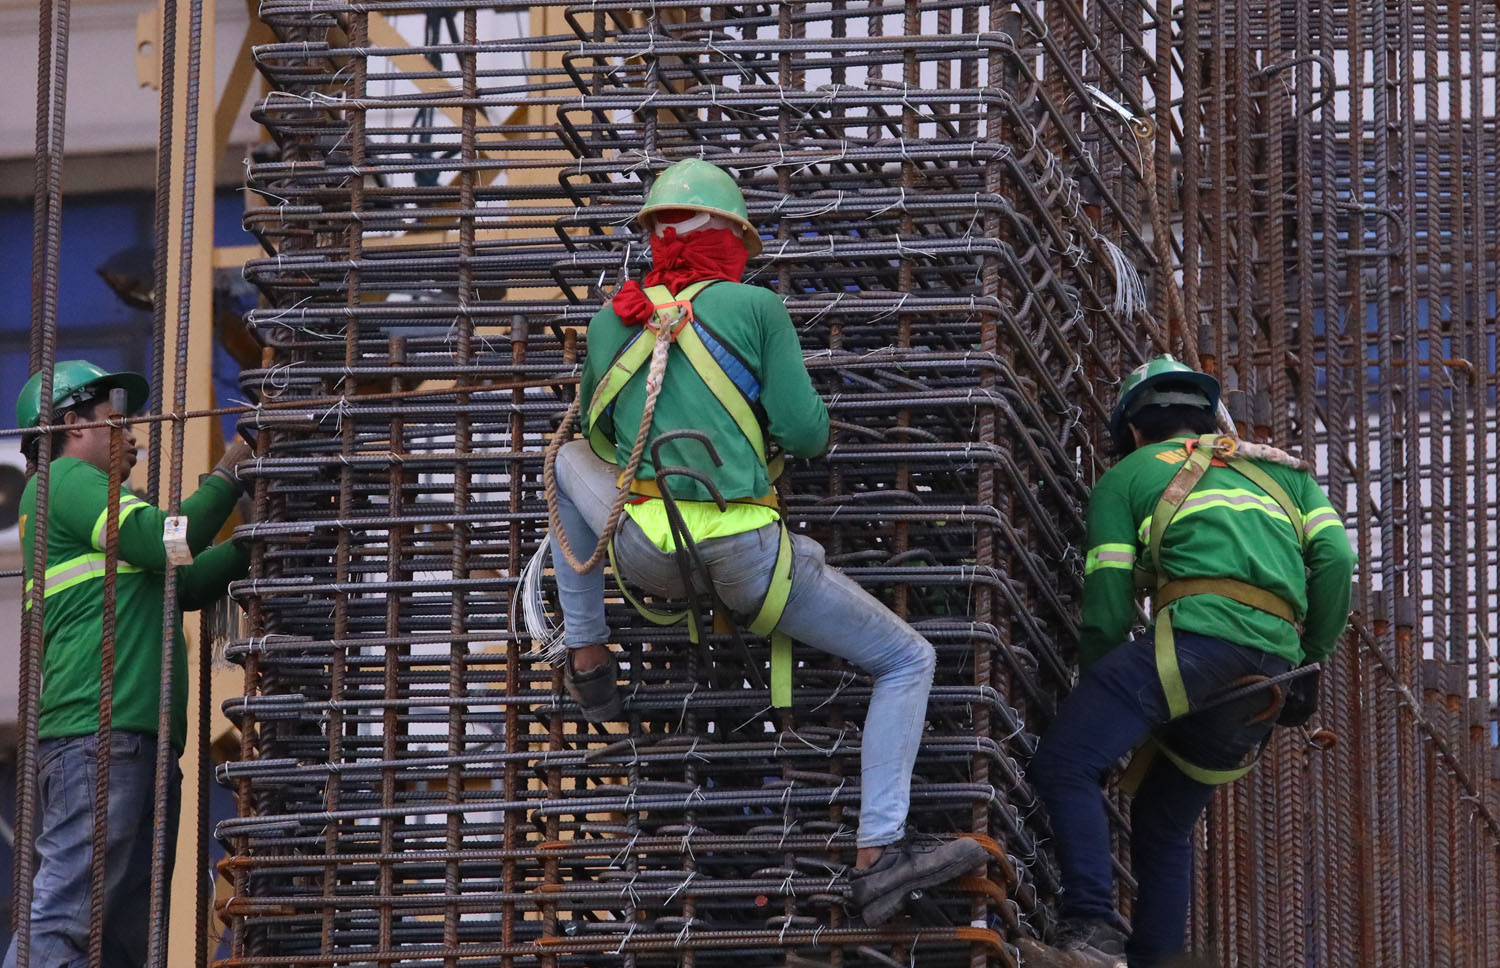 EXEMPTION. The National Economic and Development Authority wants infrastructure projects to be exempt from the election ban on public works. File photo by Darren Langit/Rappler 